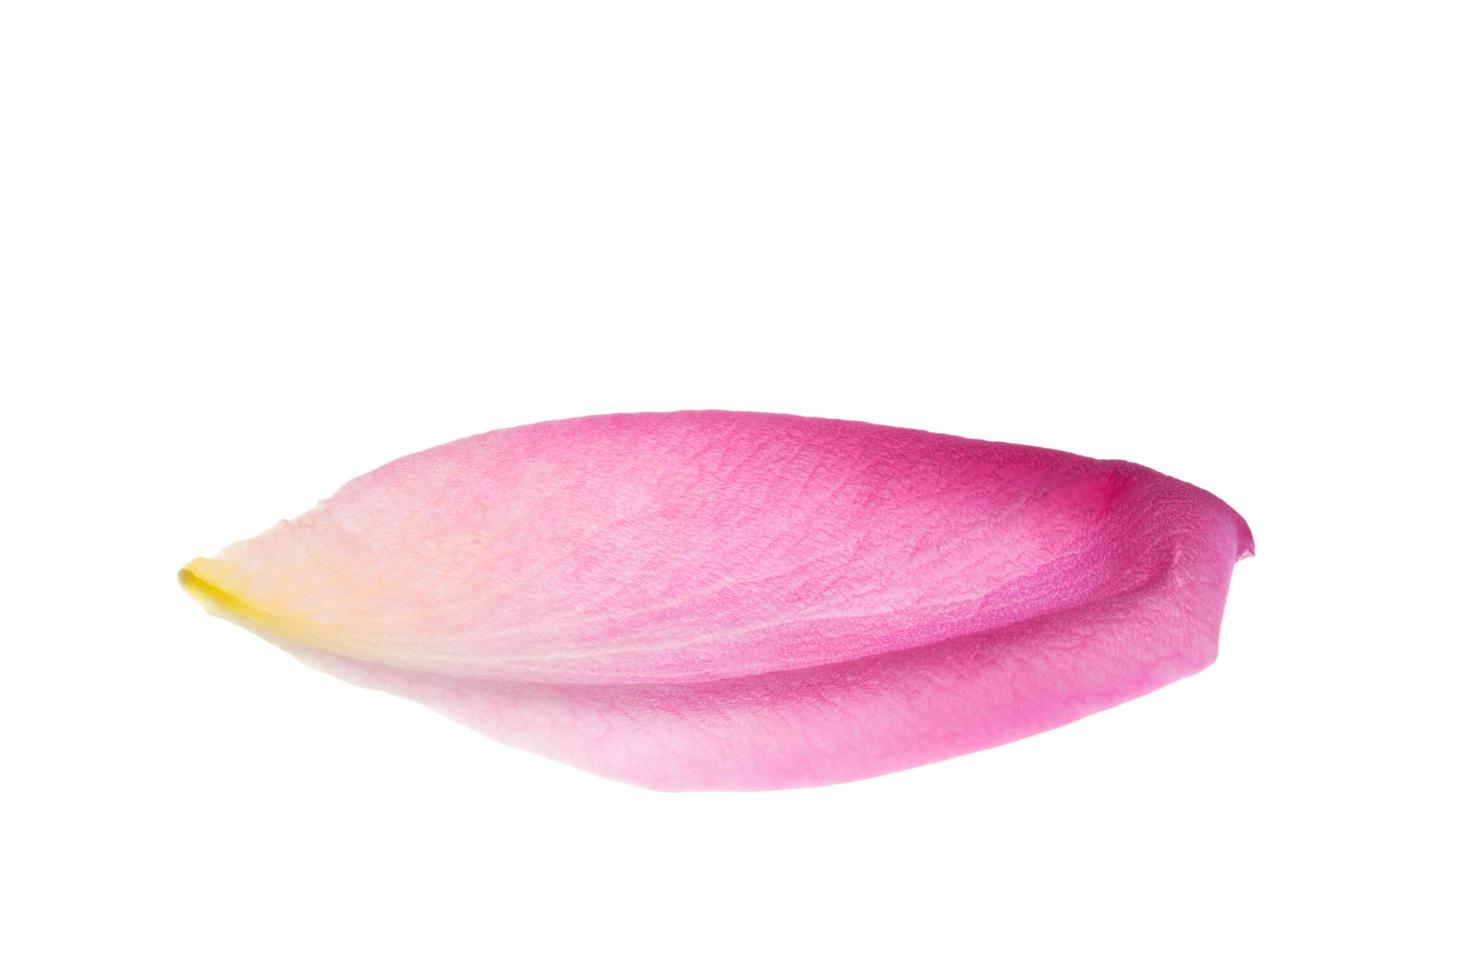 Pink rose petal on a white background photo